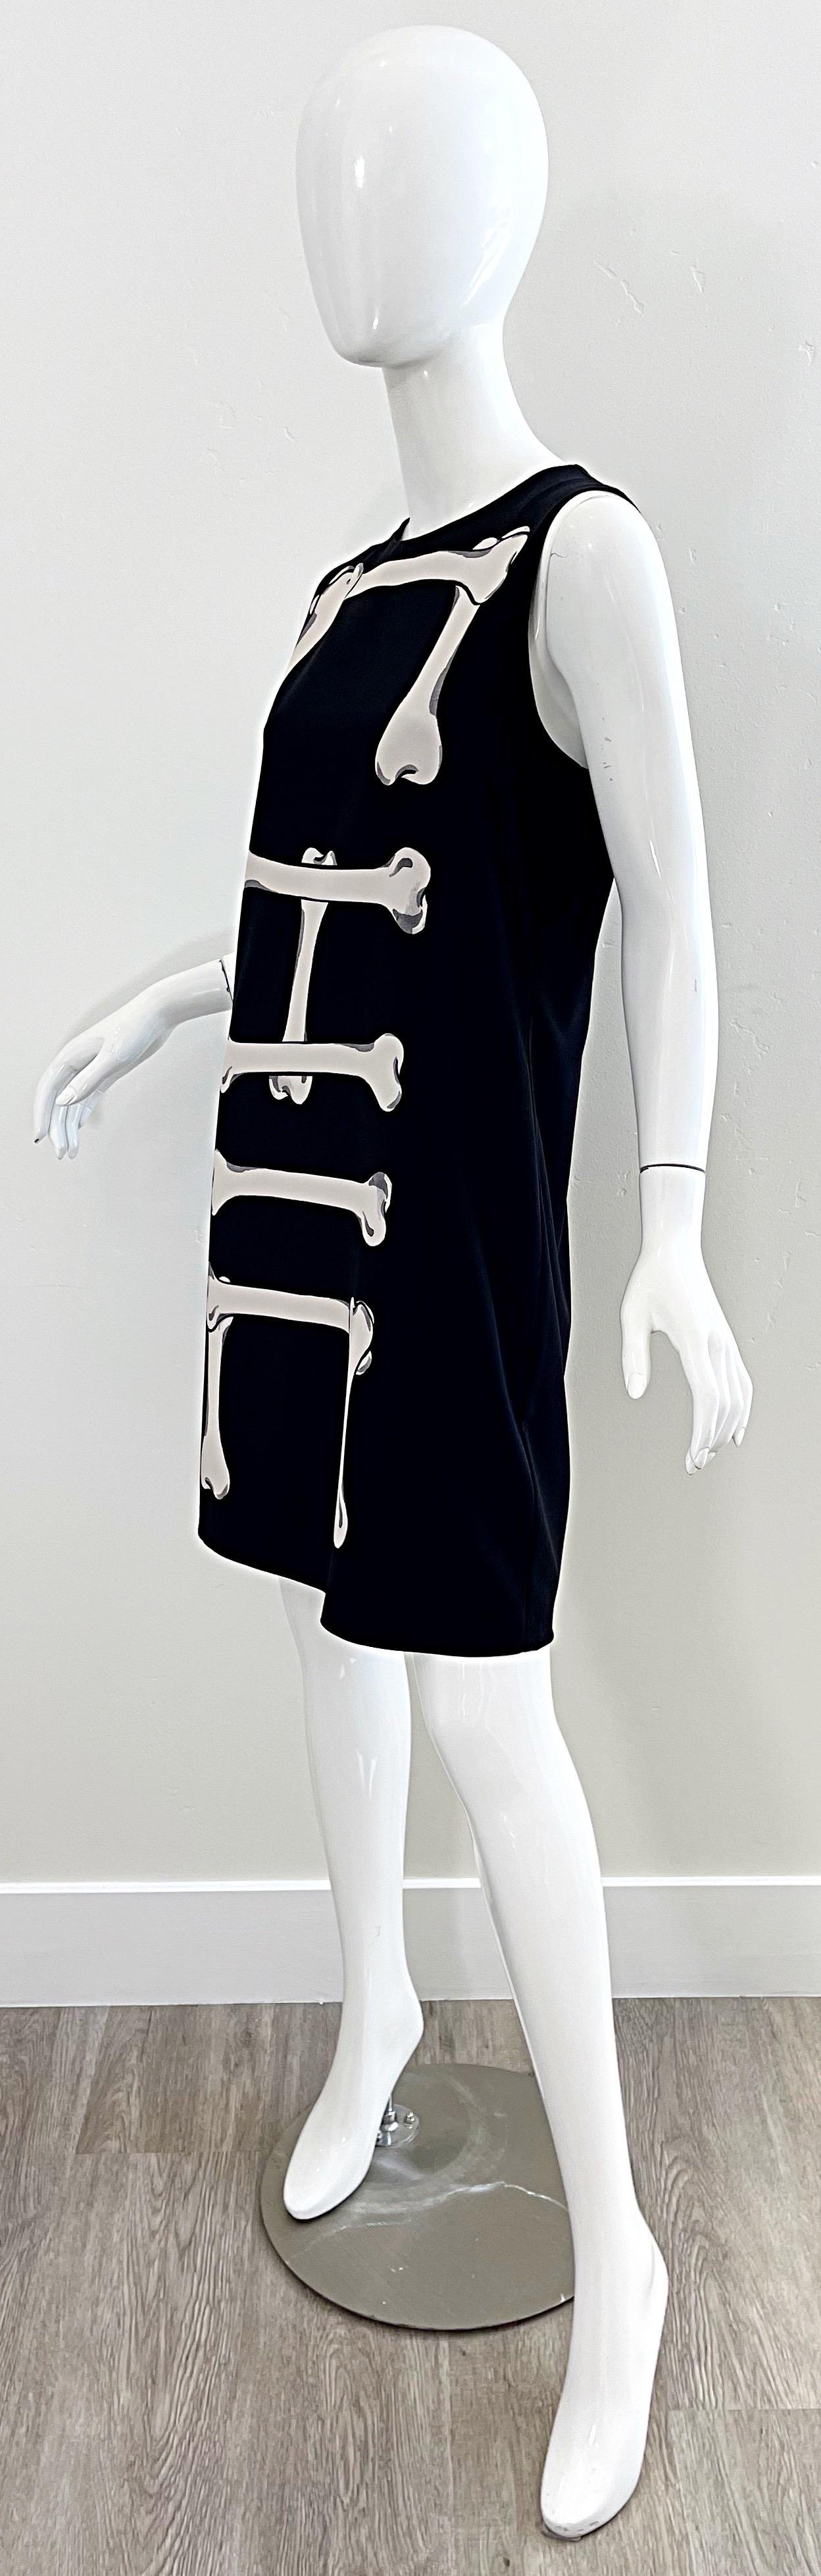 Moschino Cheap & Chic 2000s Size 10 No Bones About It Black White Skeleton Dress For Sale 5